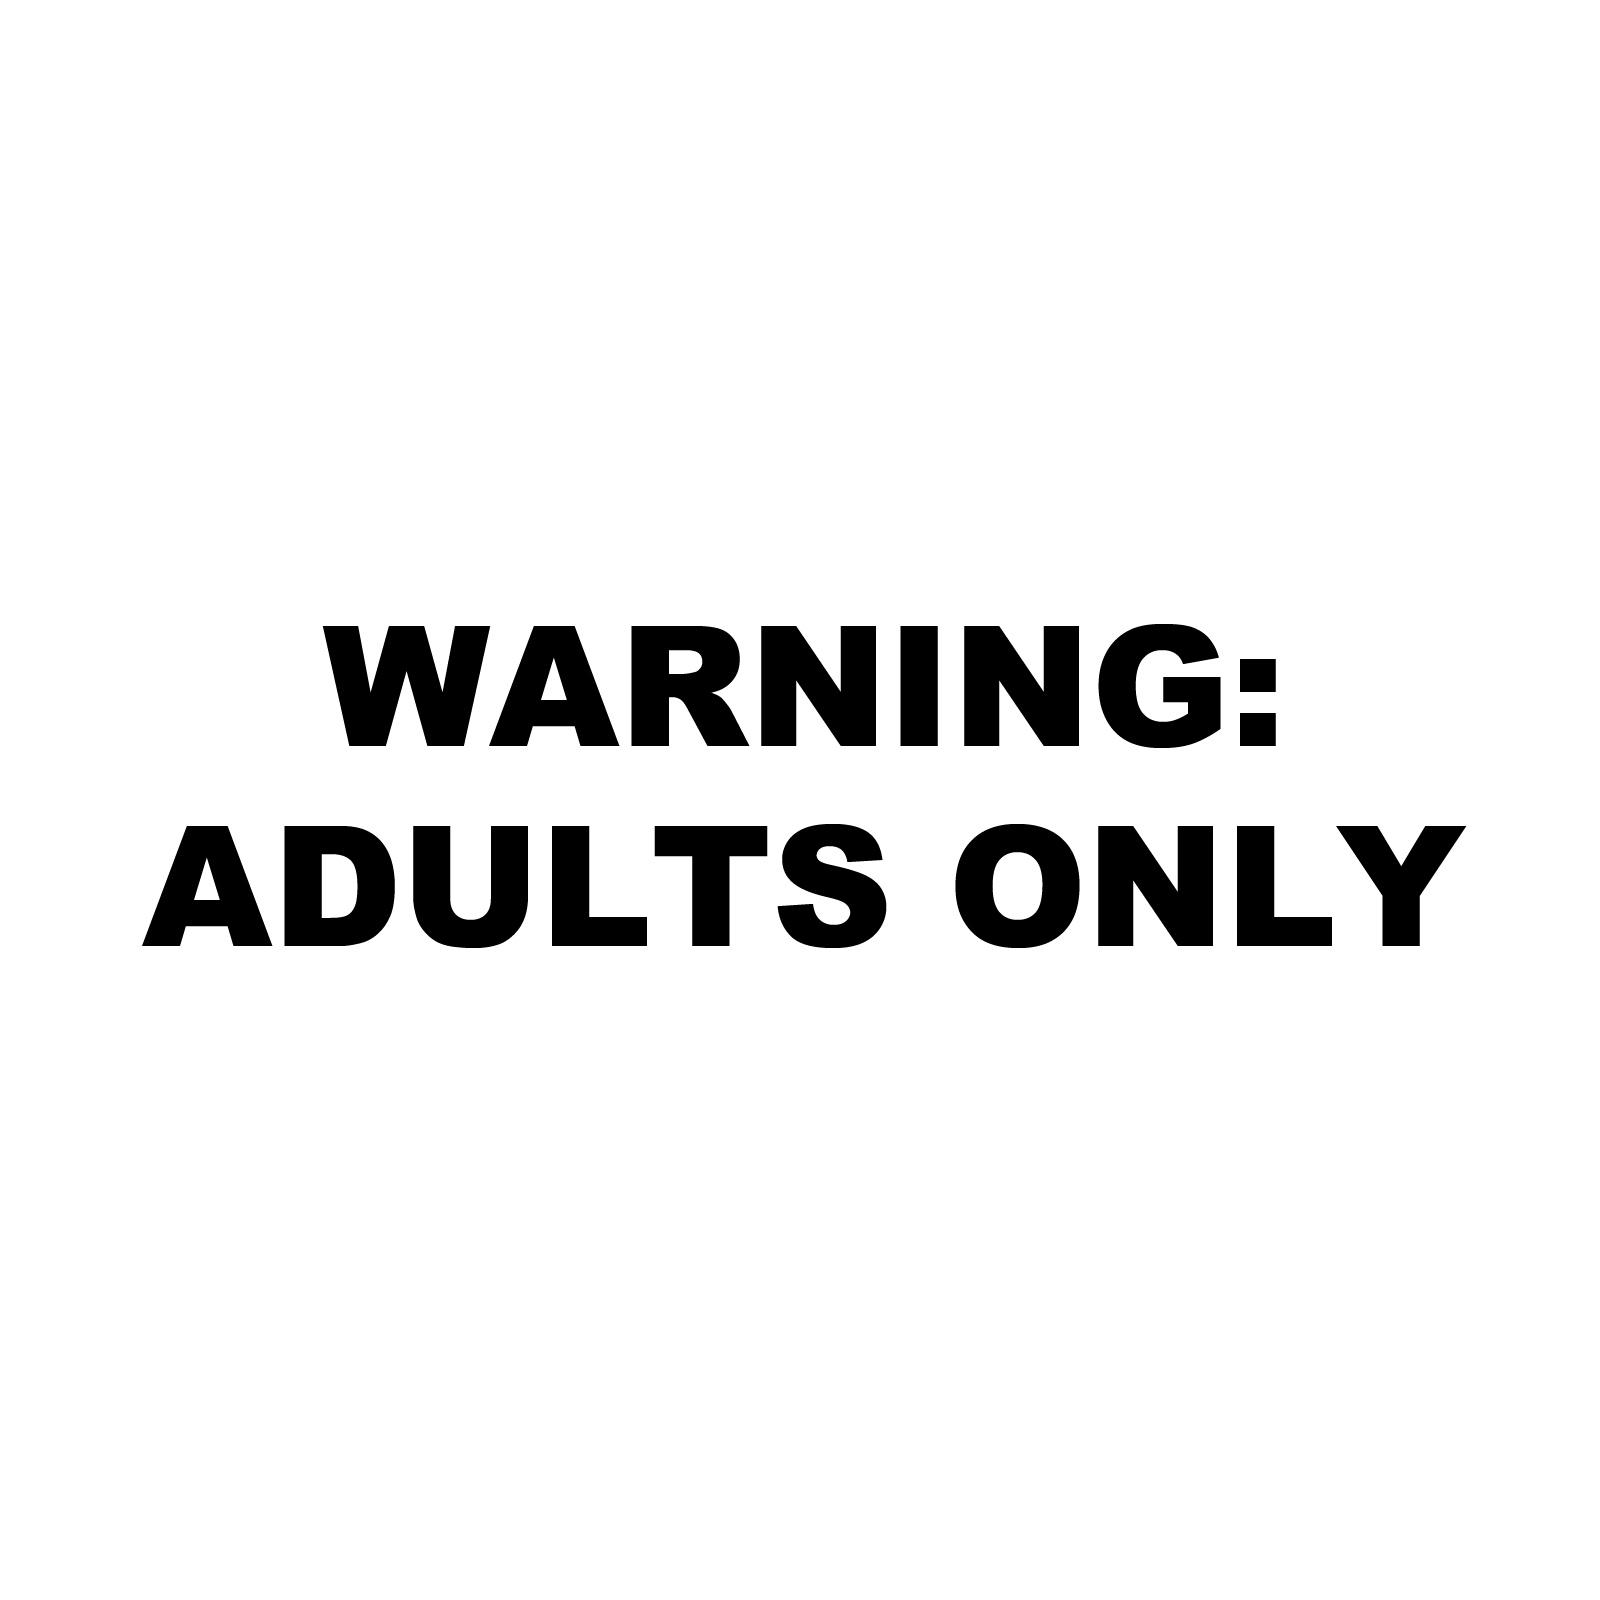 Warning: Adults Only